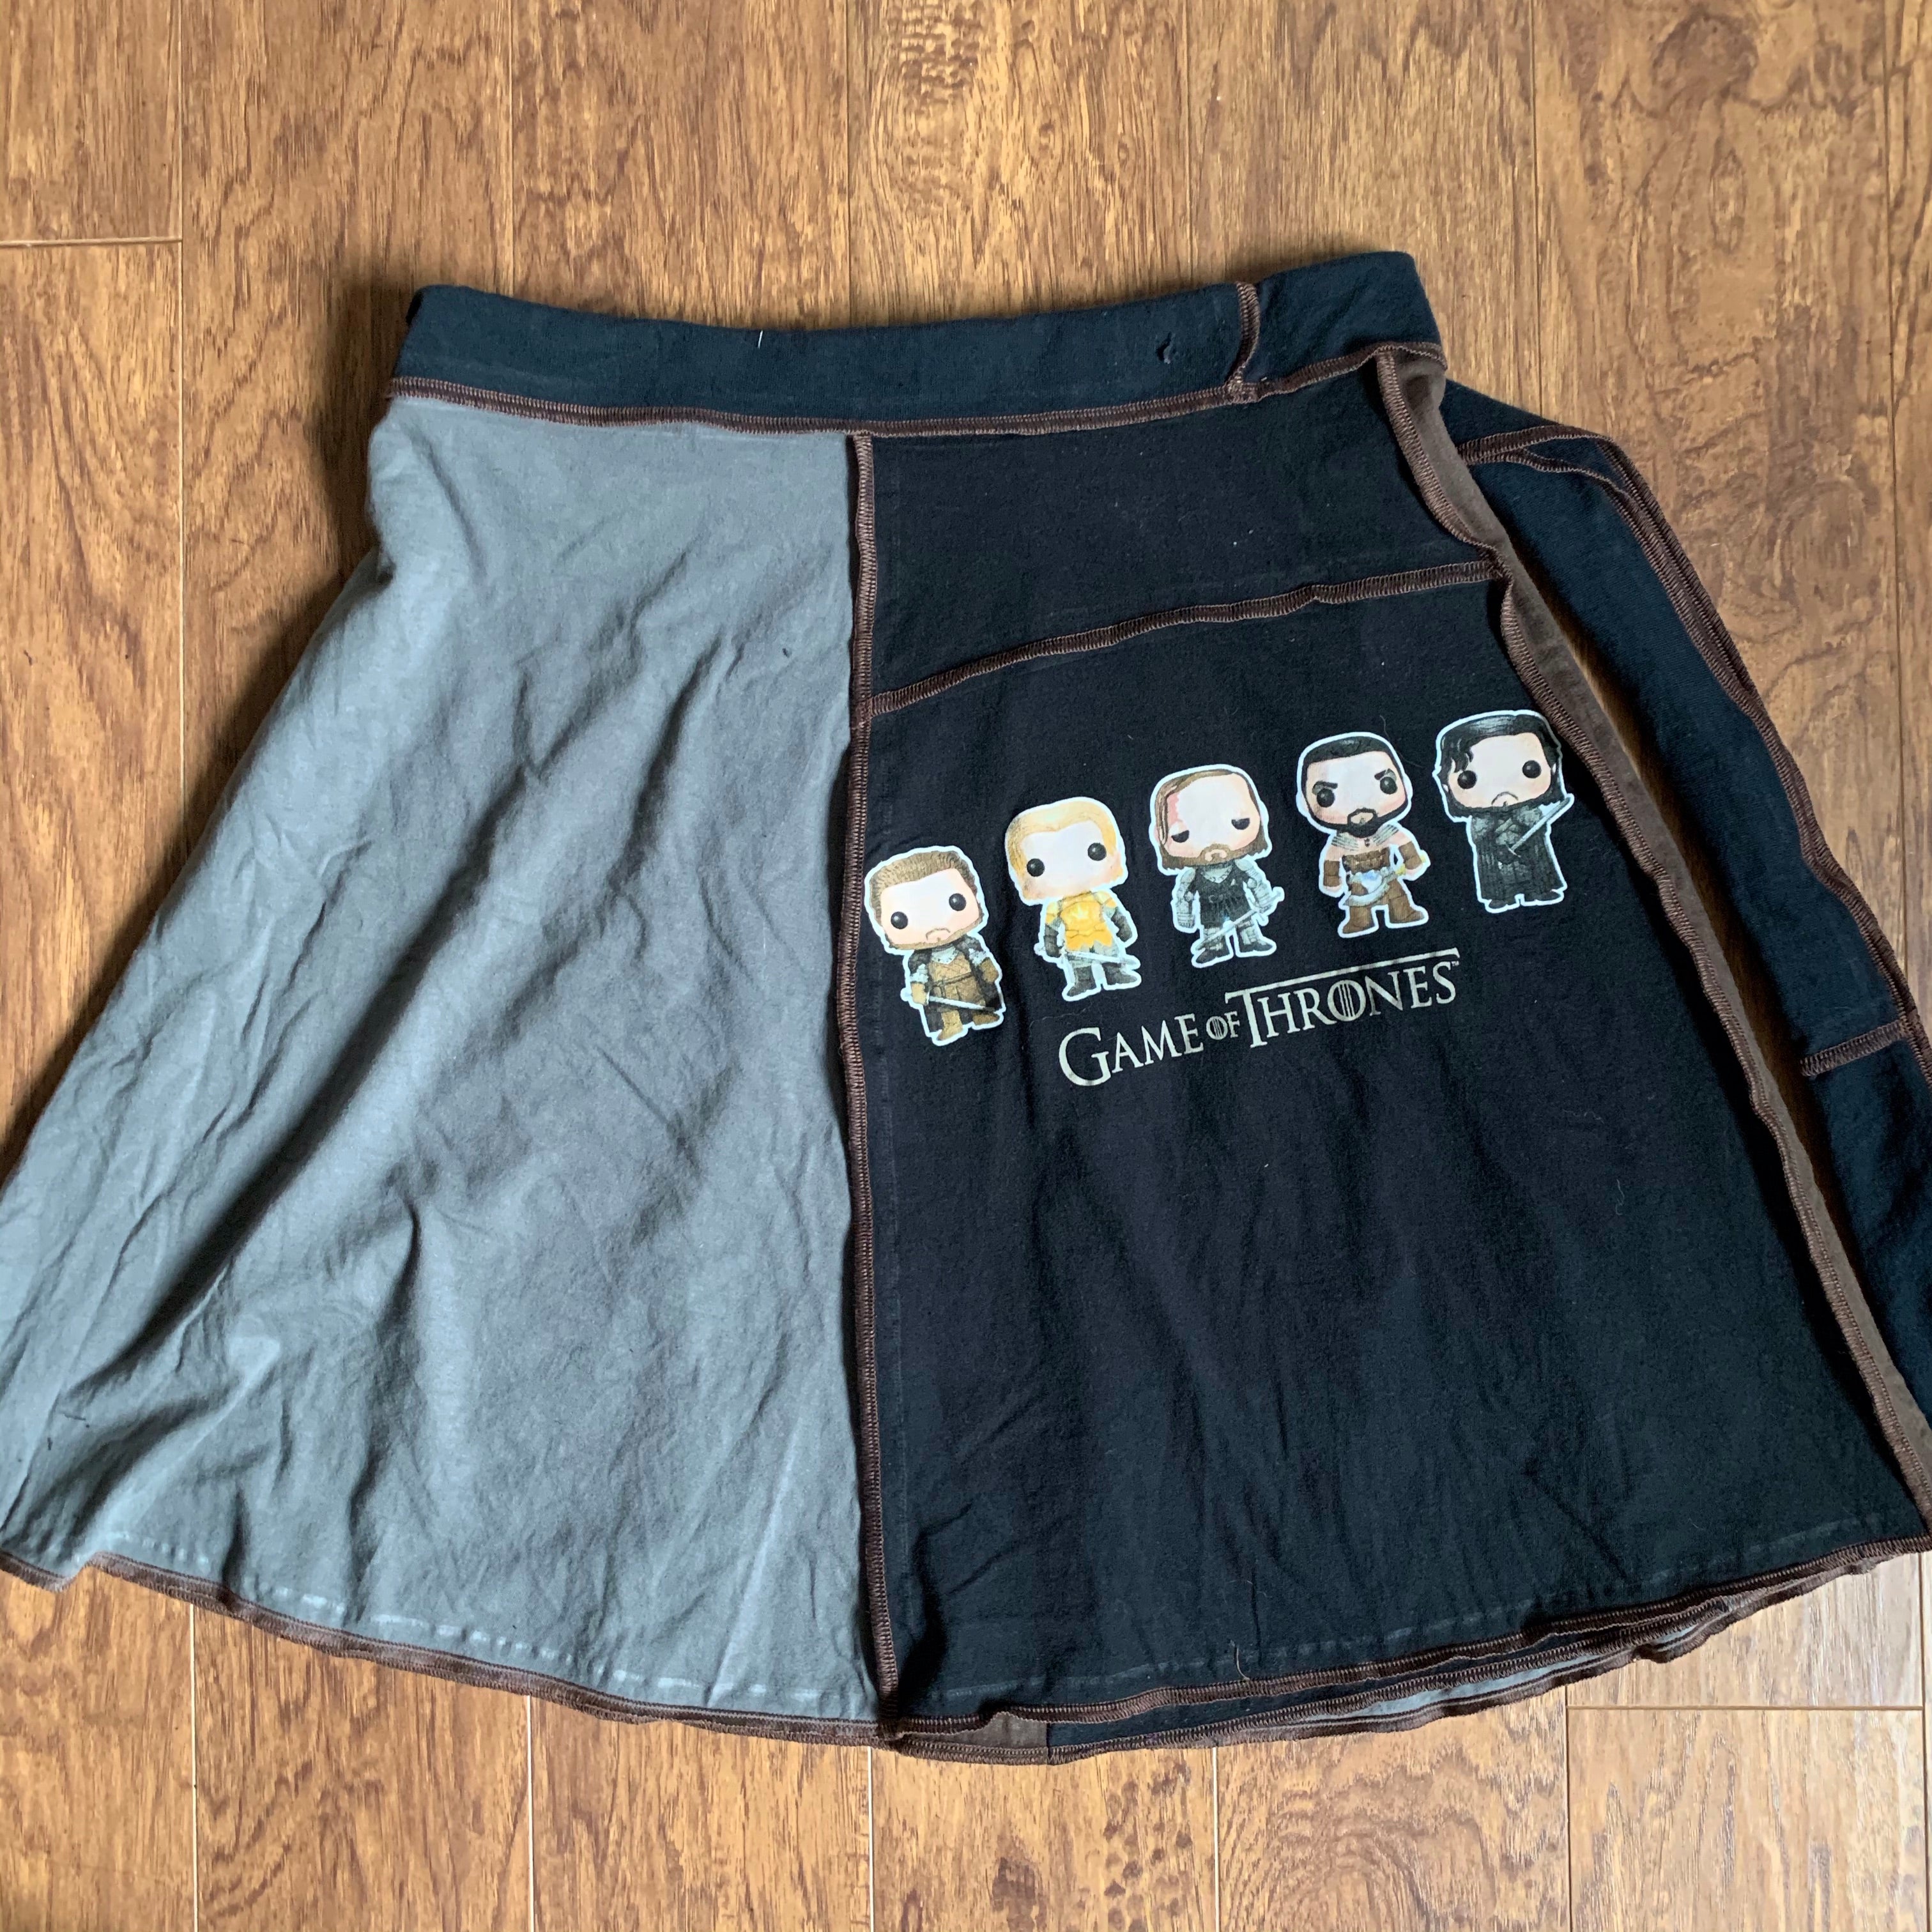 Game of Thrones Upcycled T-shirt Wrap Skirt